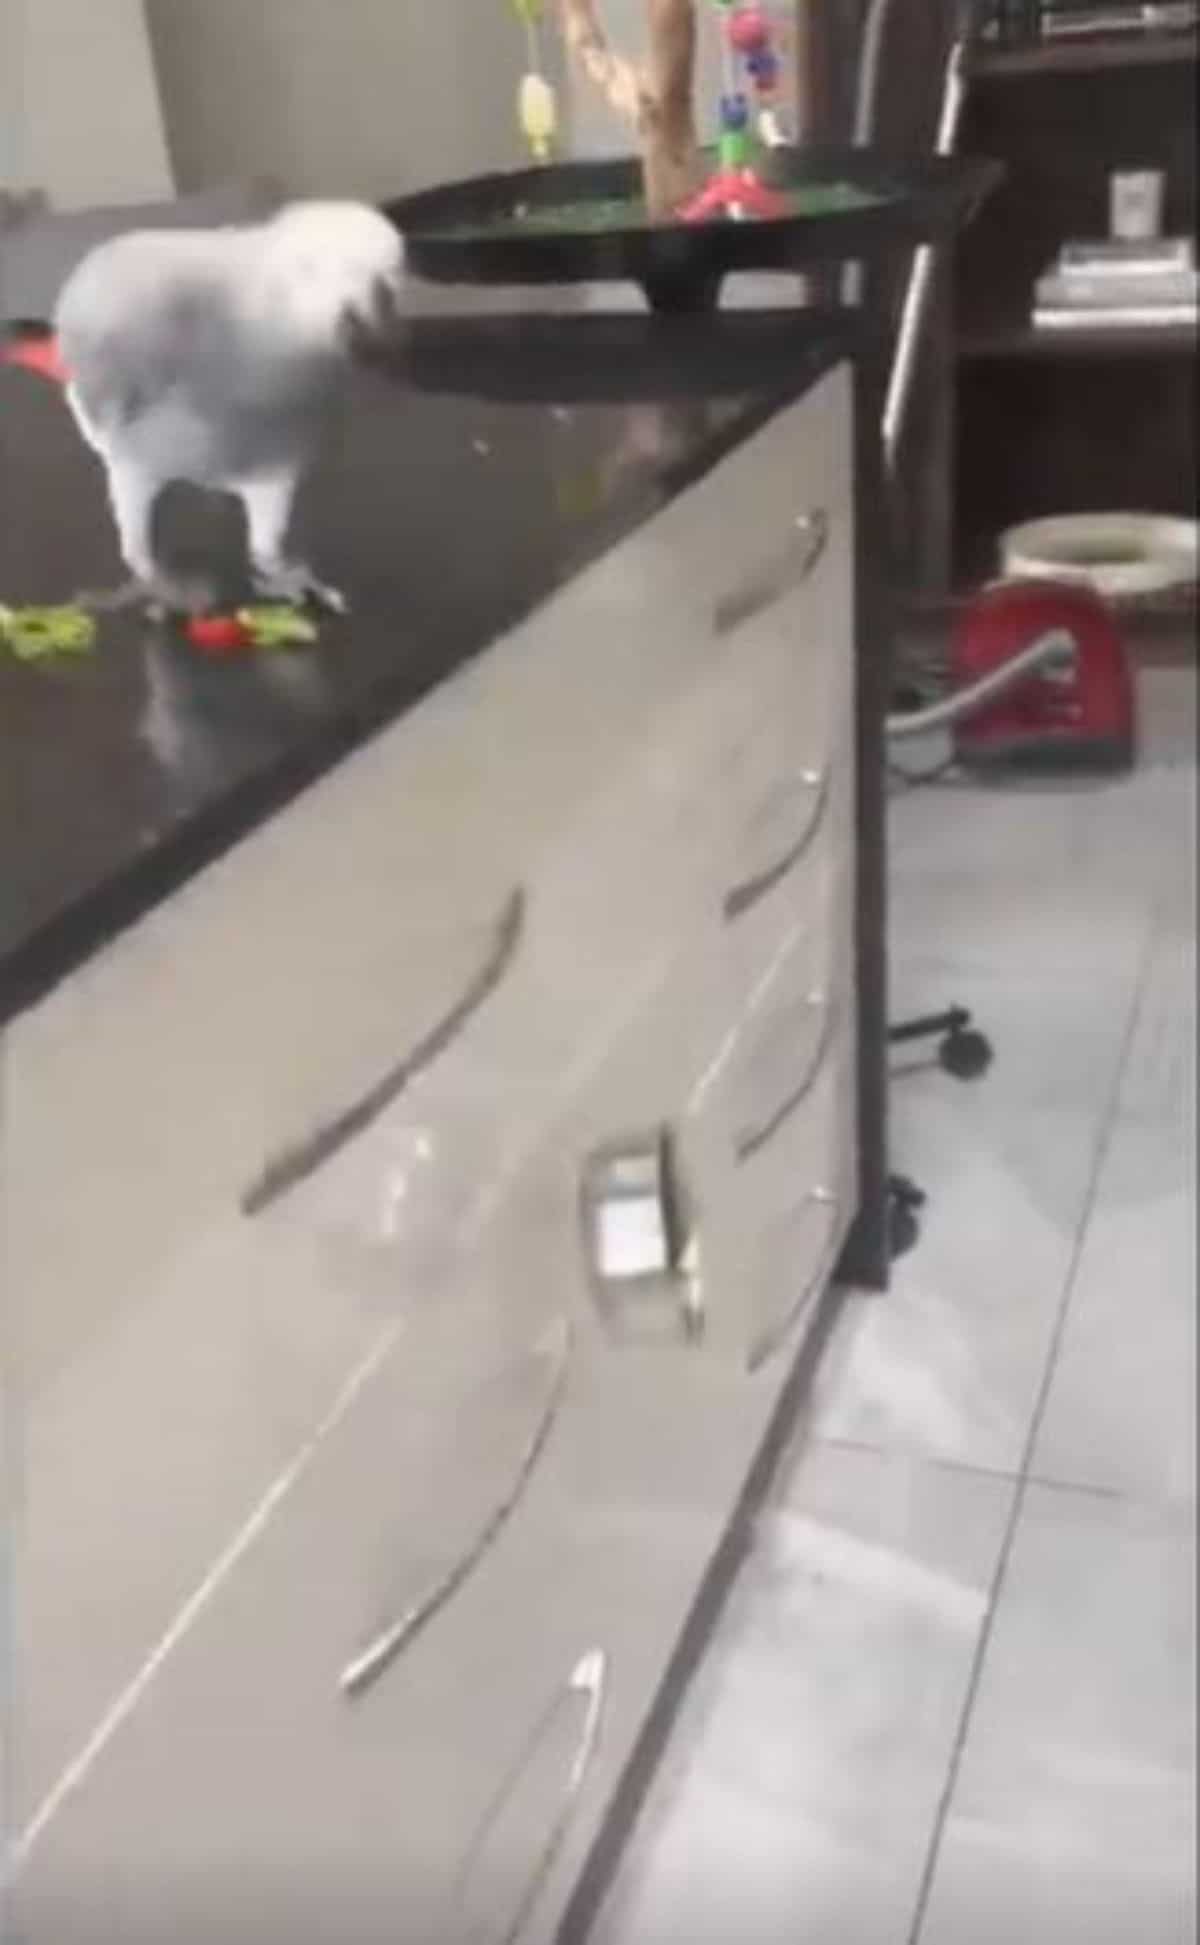 grey parrot on a counter and a bowl falling to the floor with food on the counter